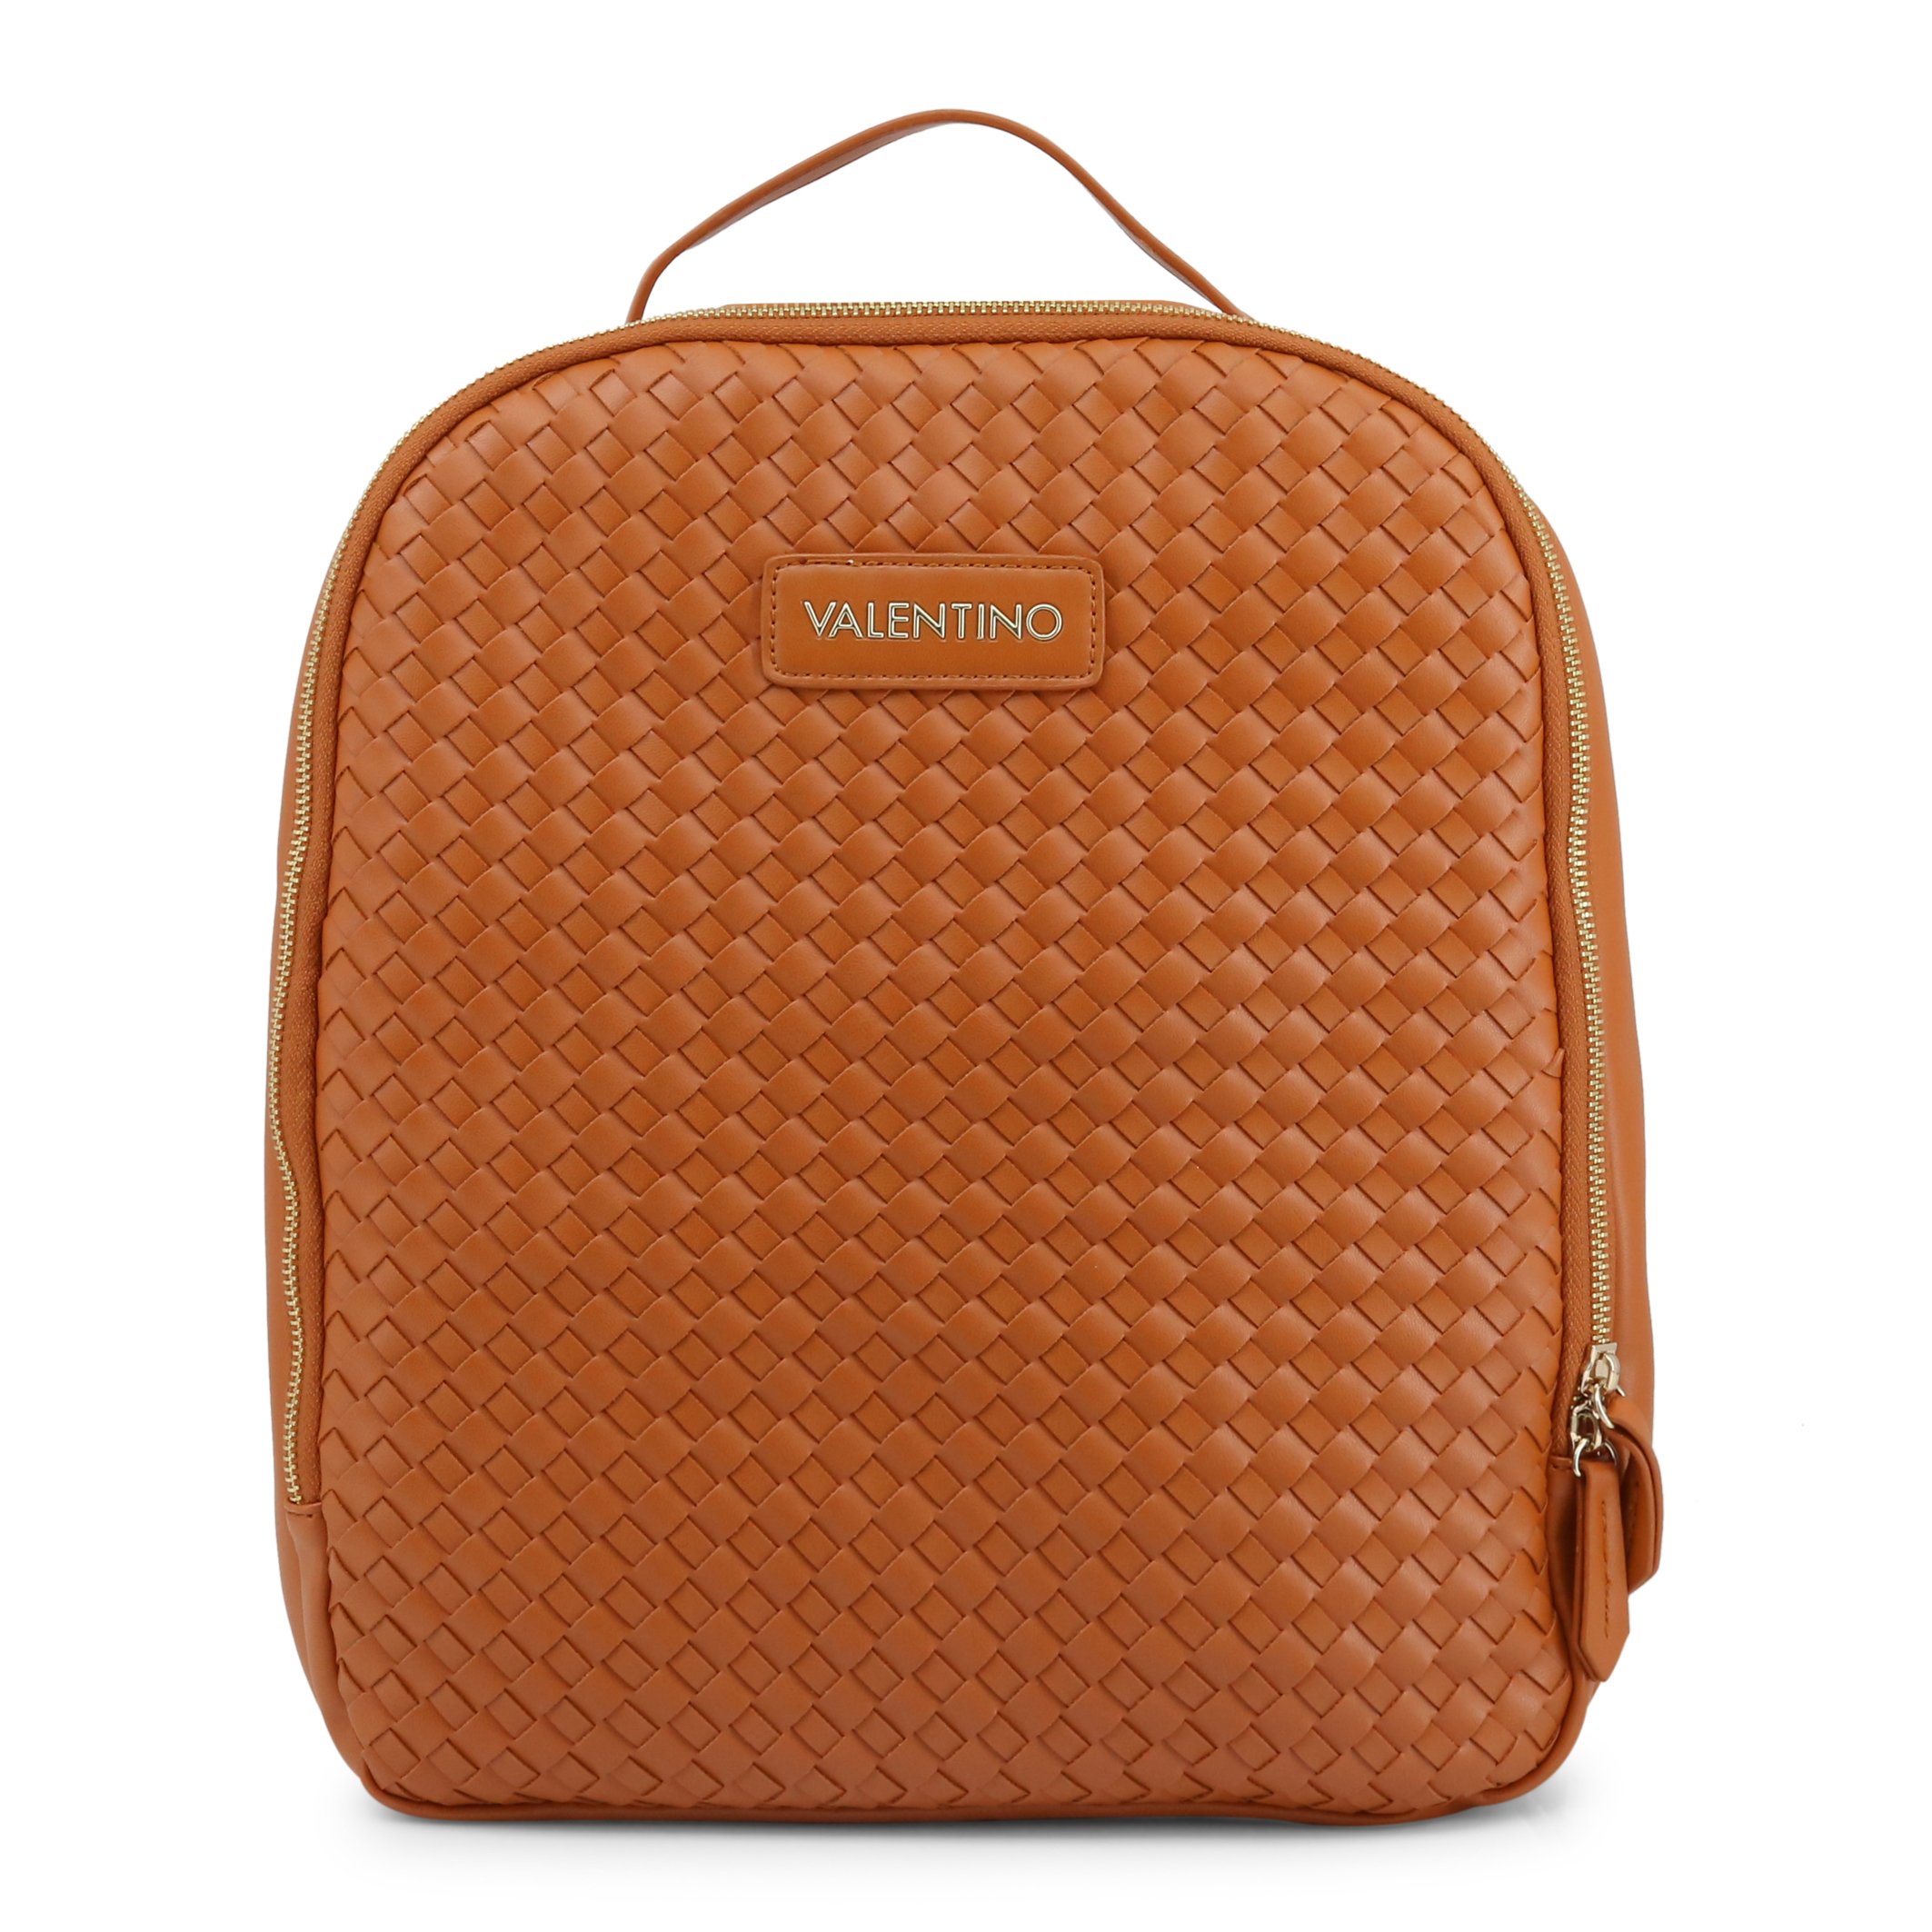 Valentino by Mario Valentino Women's Backpack Various Colours DOXY-VBS3WV03I - brown NOSIZE